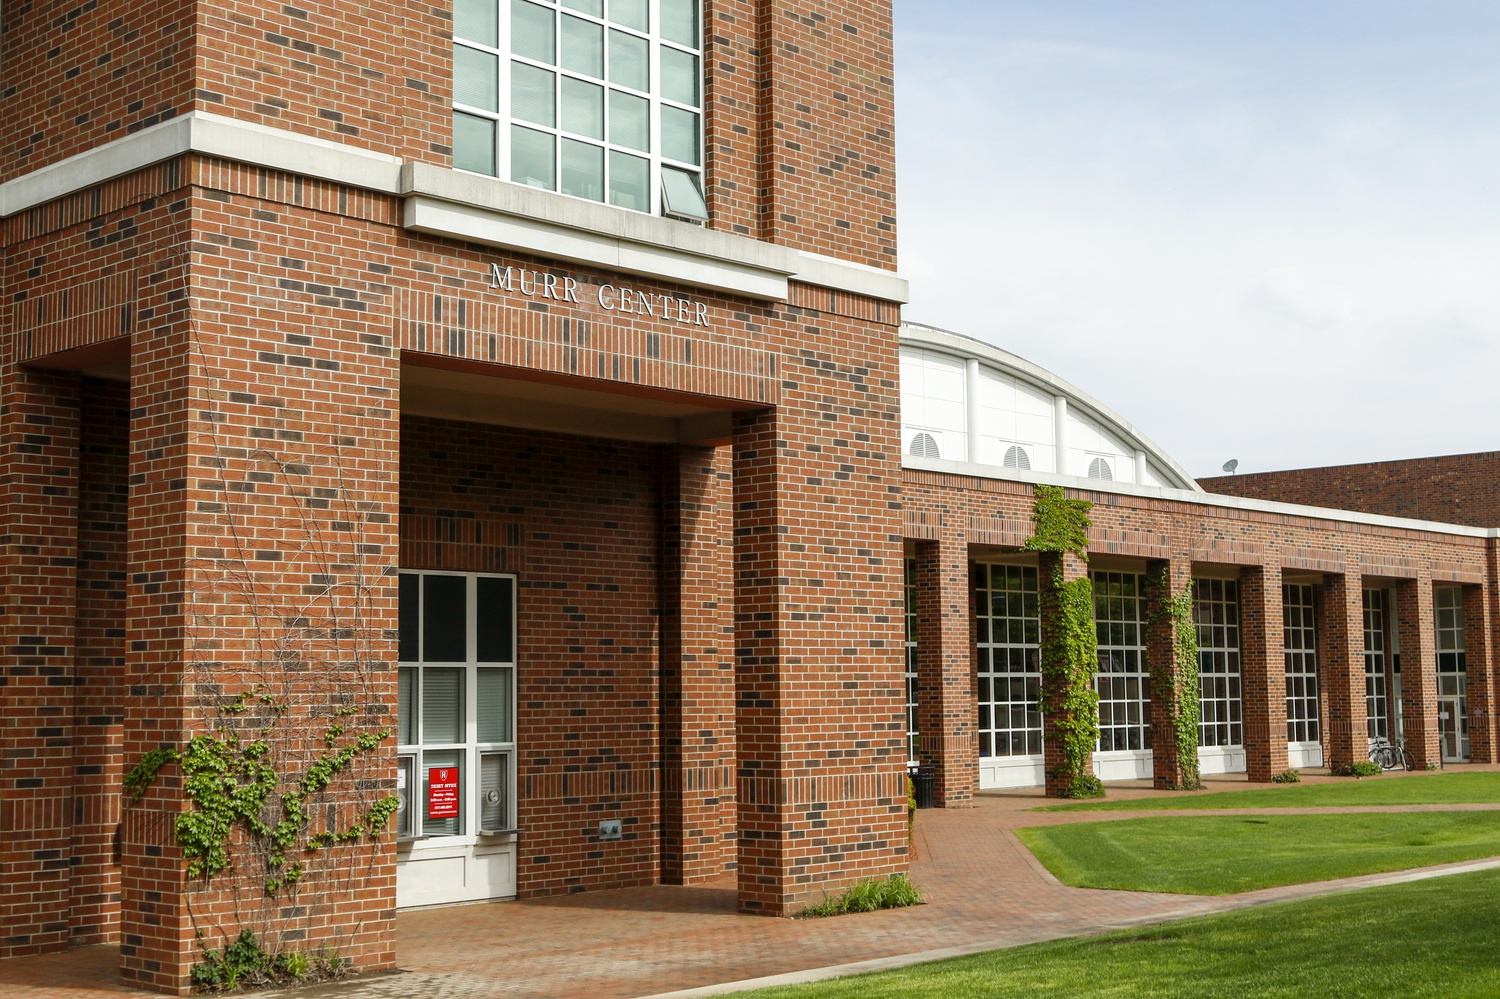 The Murr Center holds the Harvard Athletics's administrative offices, as well as squash and tennis facilities.